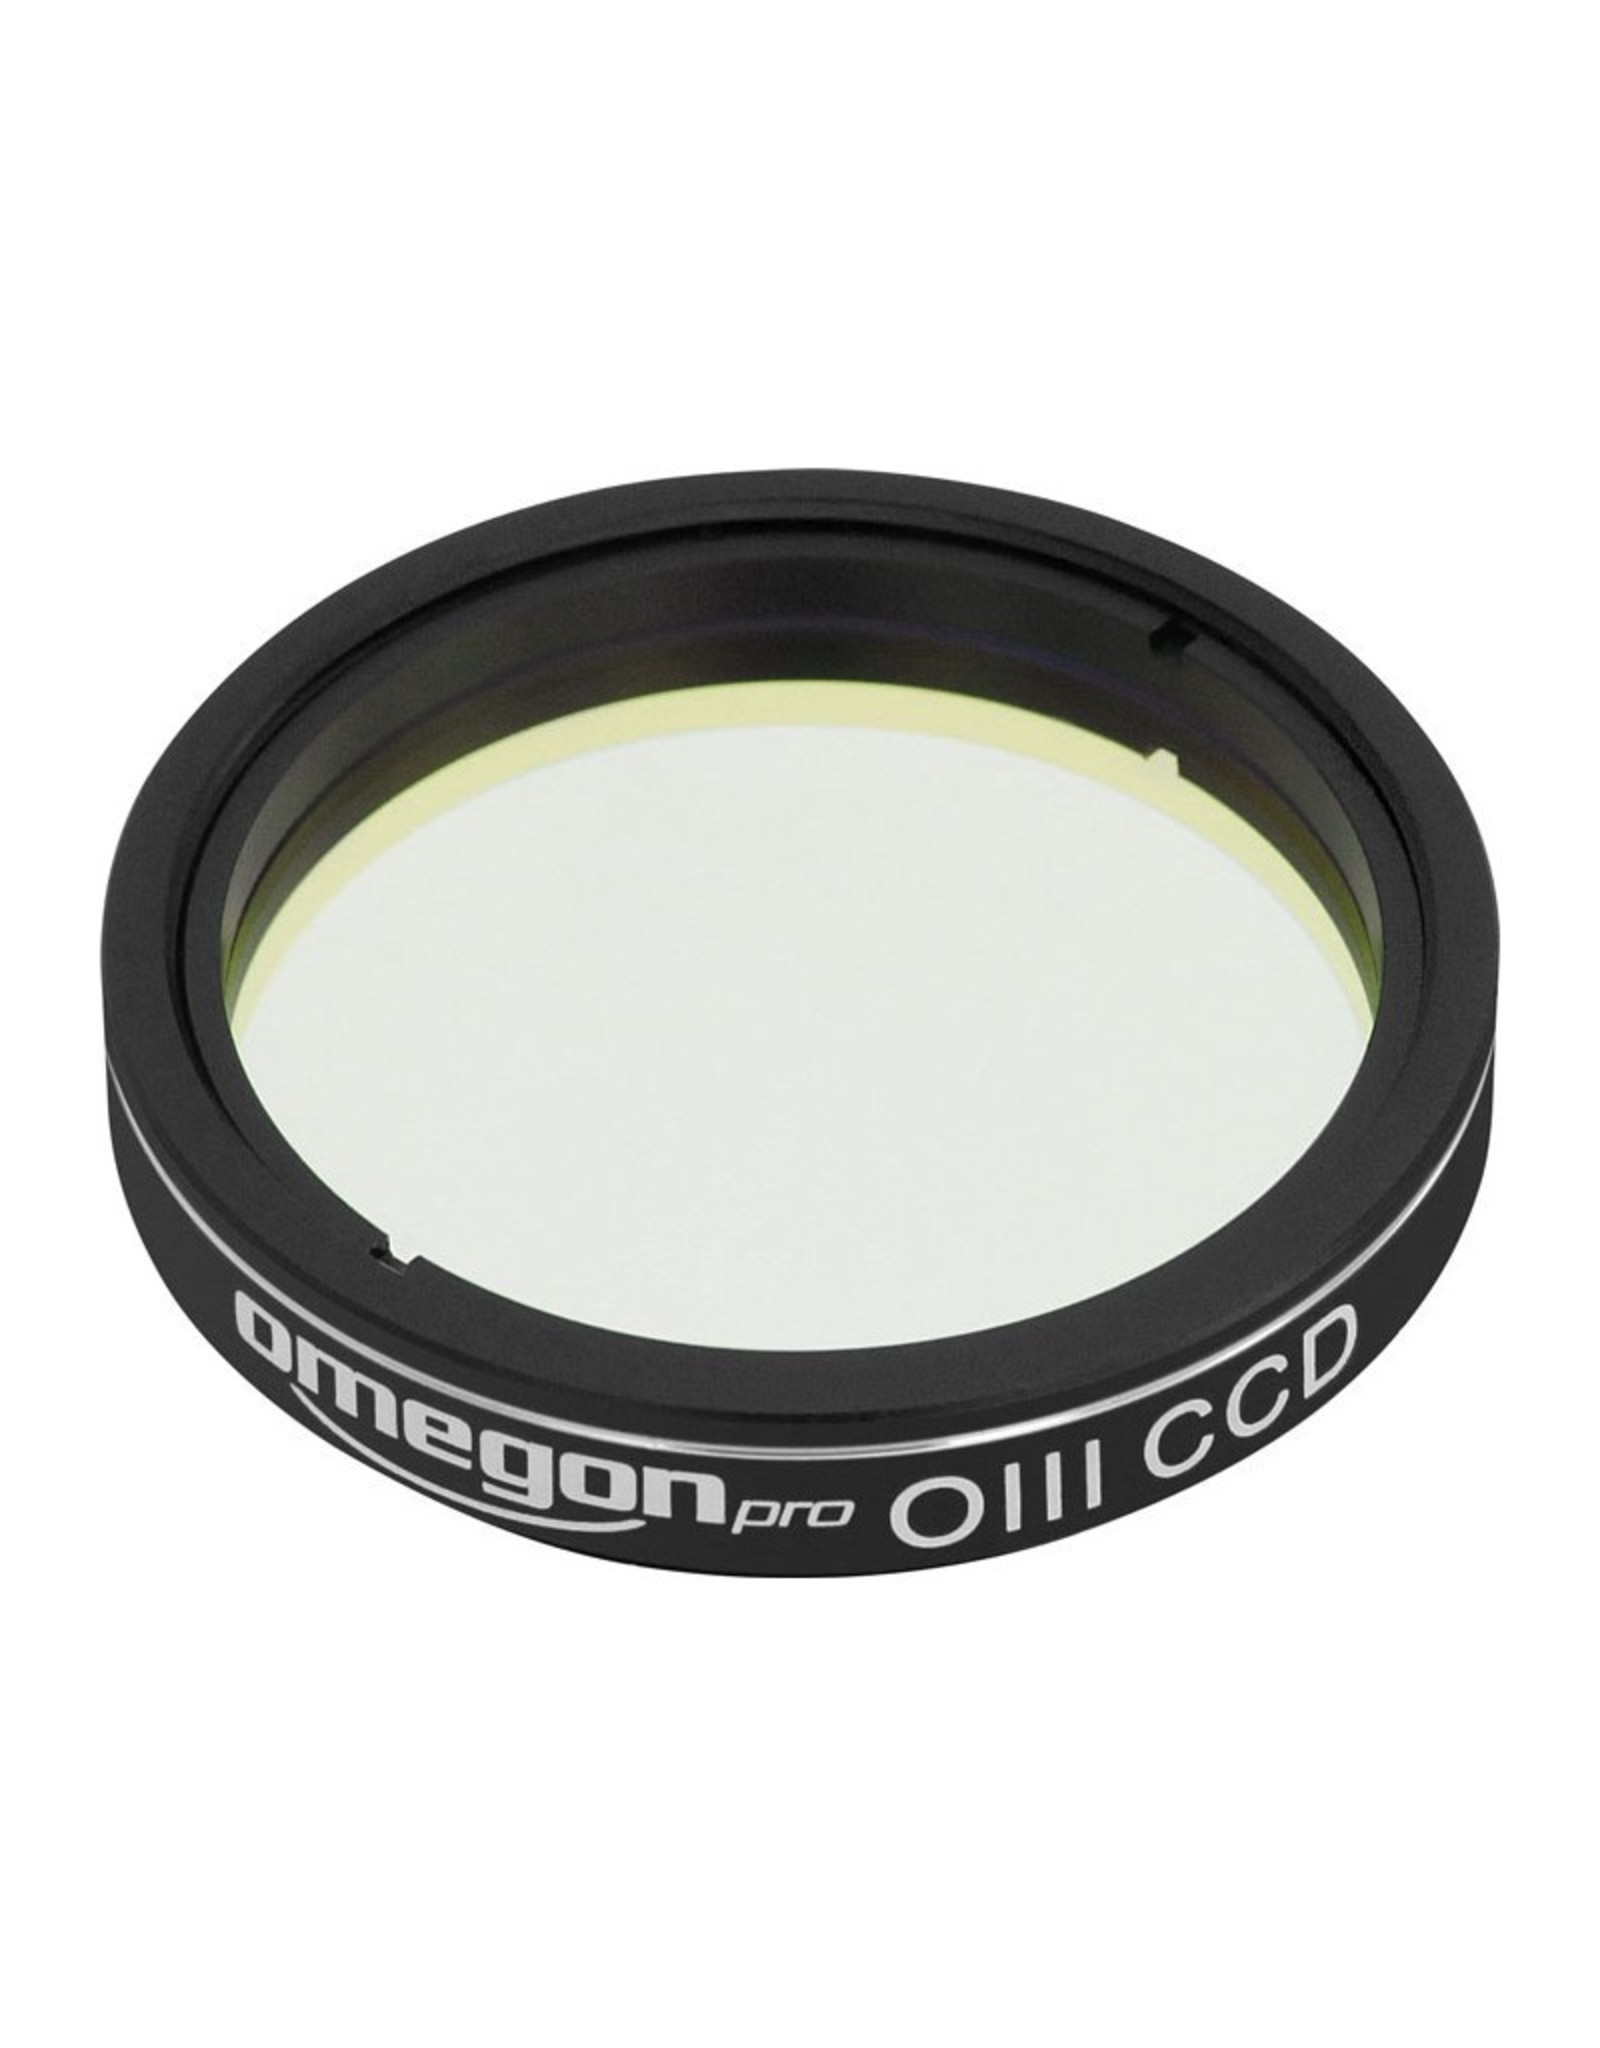 Omegon Pro 1.25'' OIII CCD filter